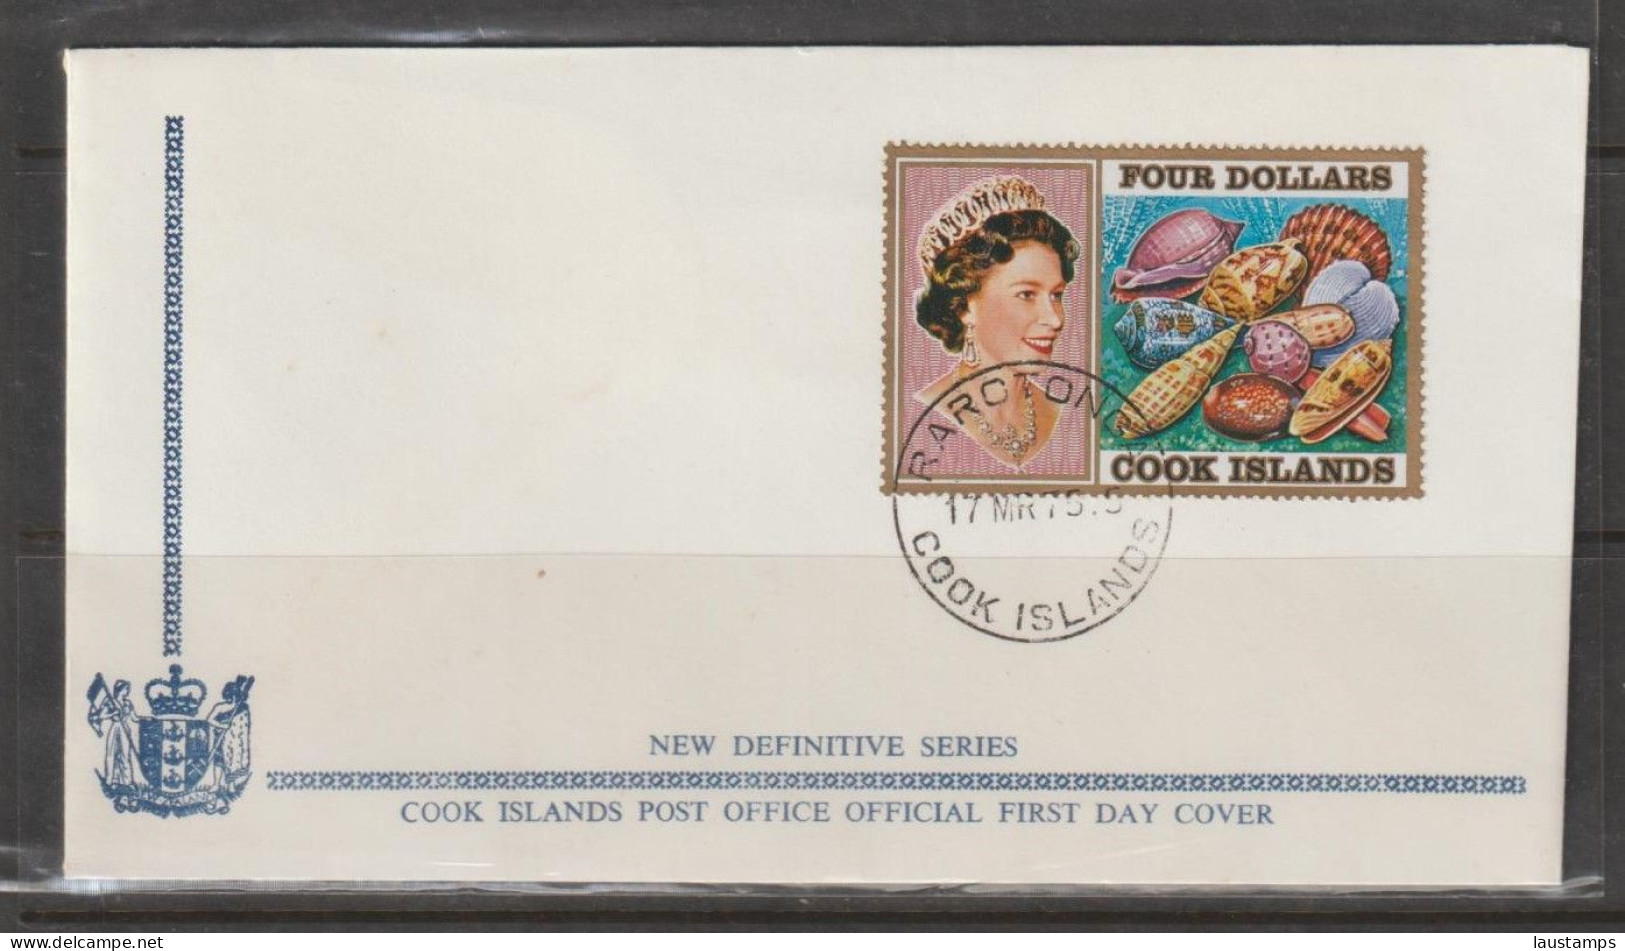 Cook Islands 1974 Shell Definitive Series($4) FDC - Conchas